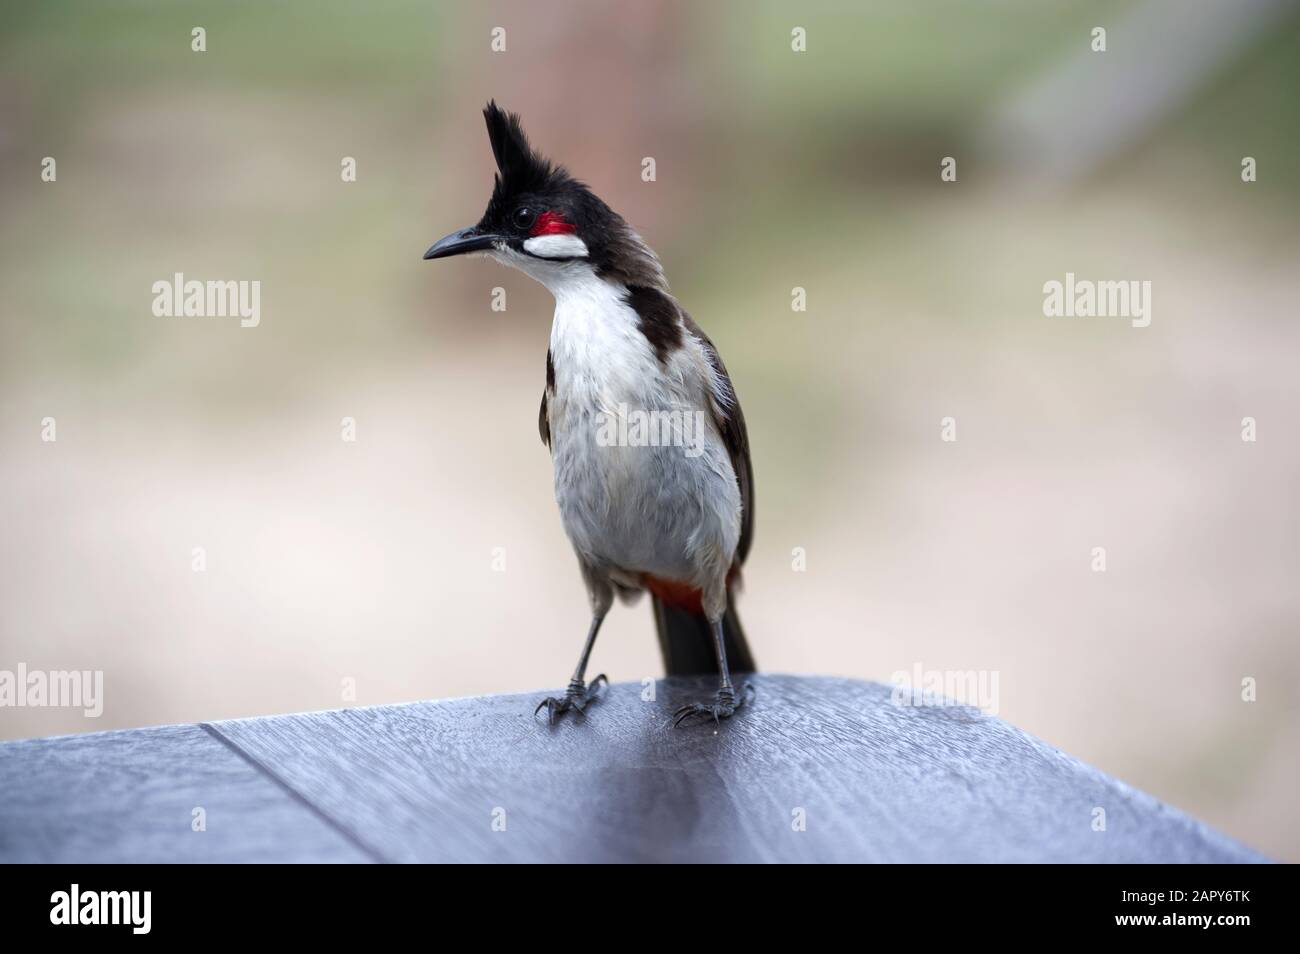 A red-whiskered or crested bulbul or pychonotus jocosus stands on a table in Mauritius - an invasive species to the island nation Stock Photo